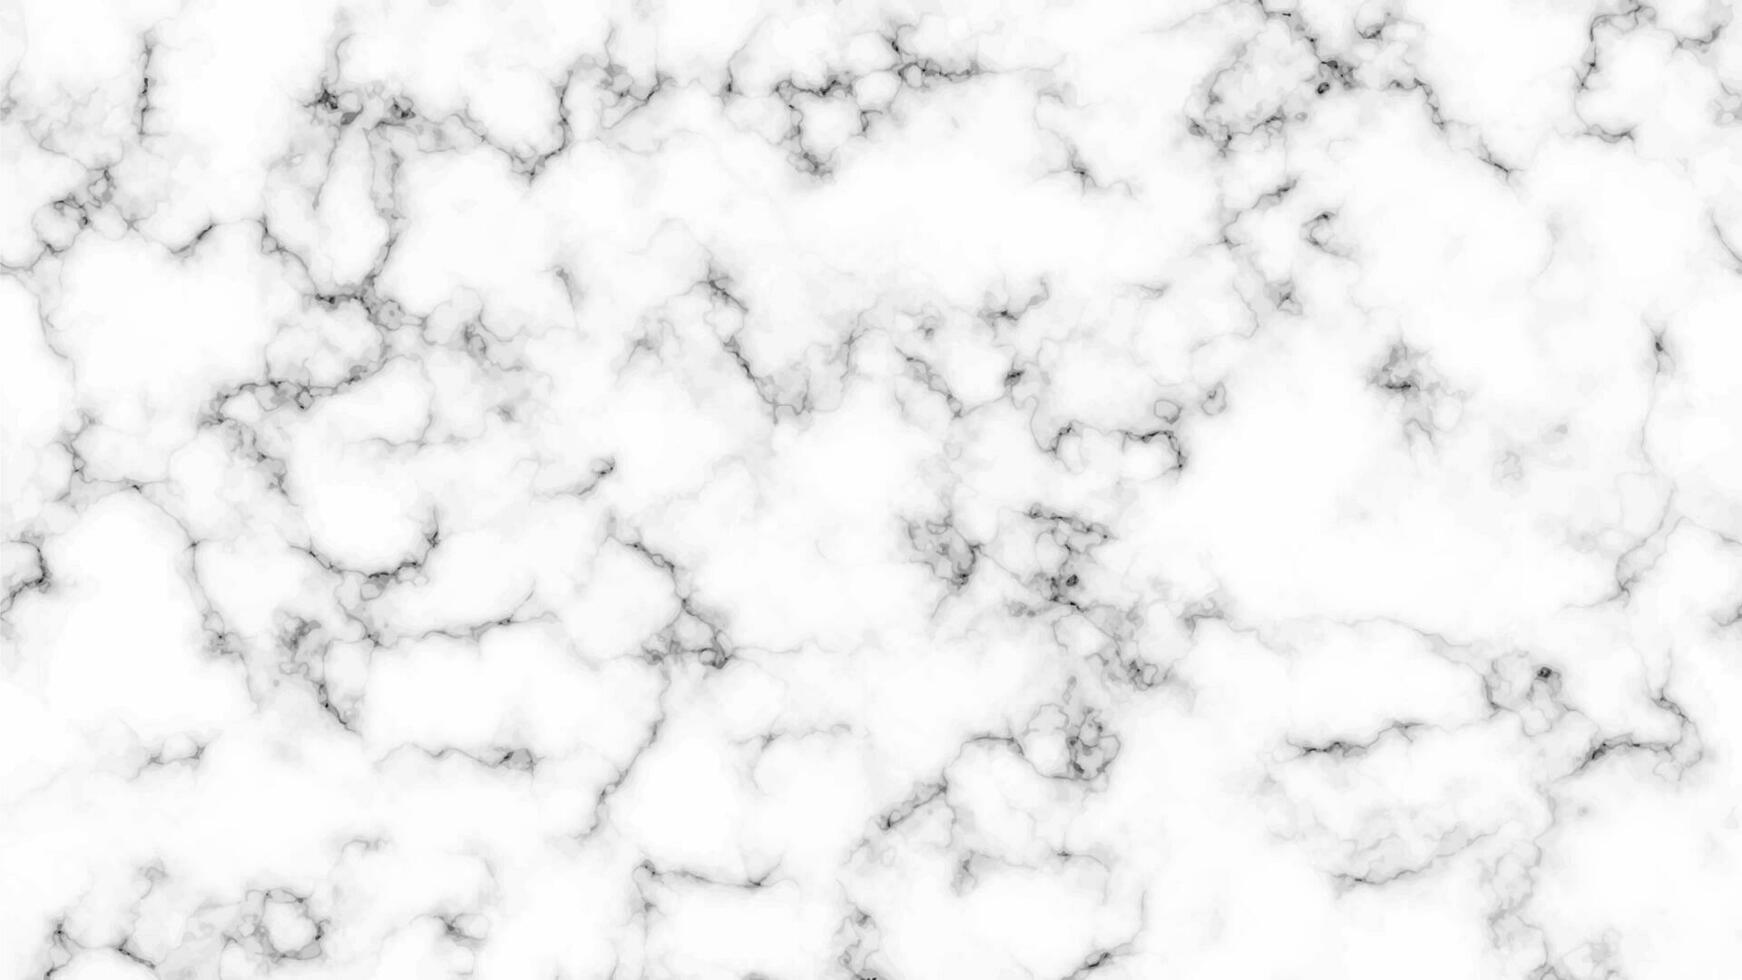 White marble texture background. Abstract backdrop of marble granite stone. Vector illustration